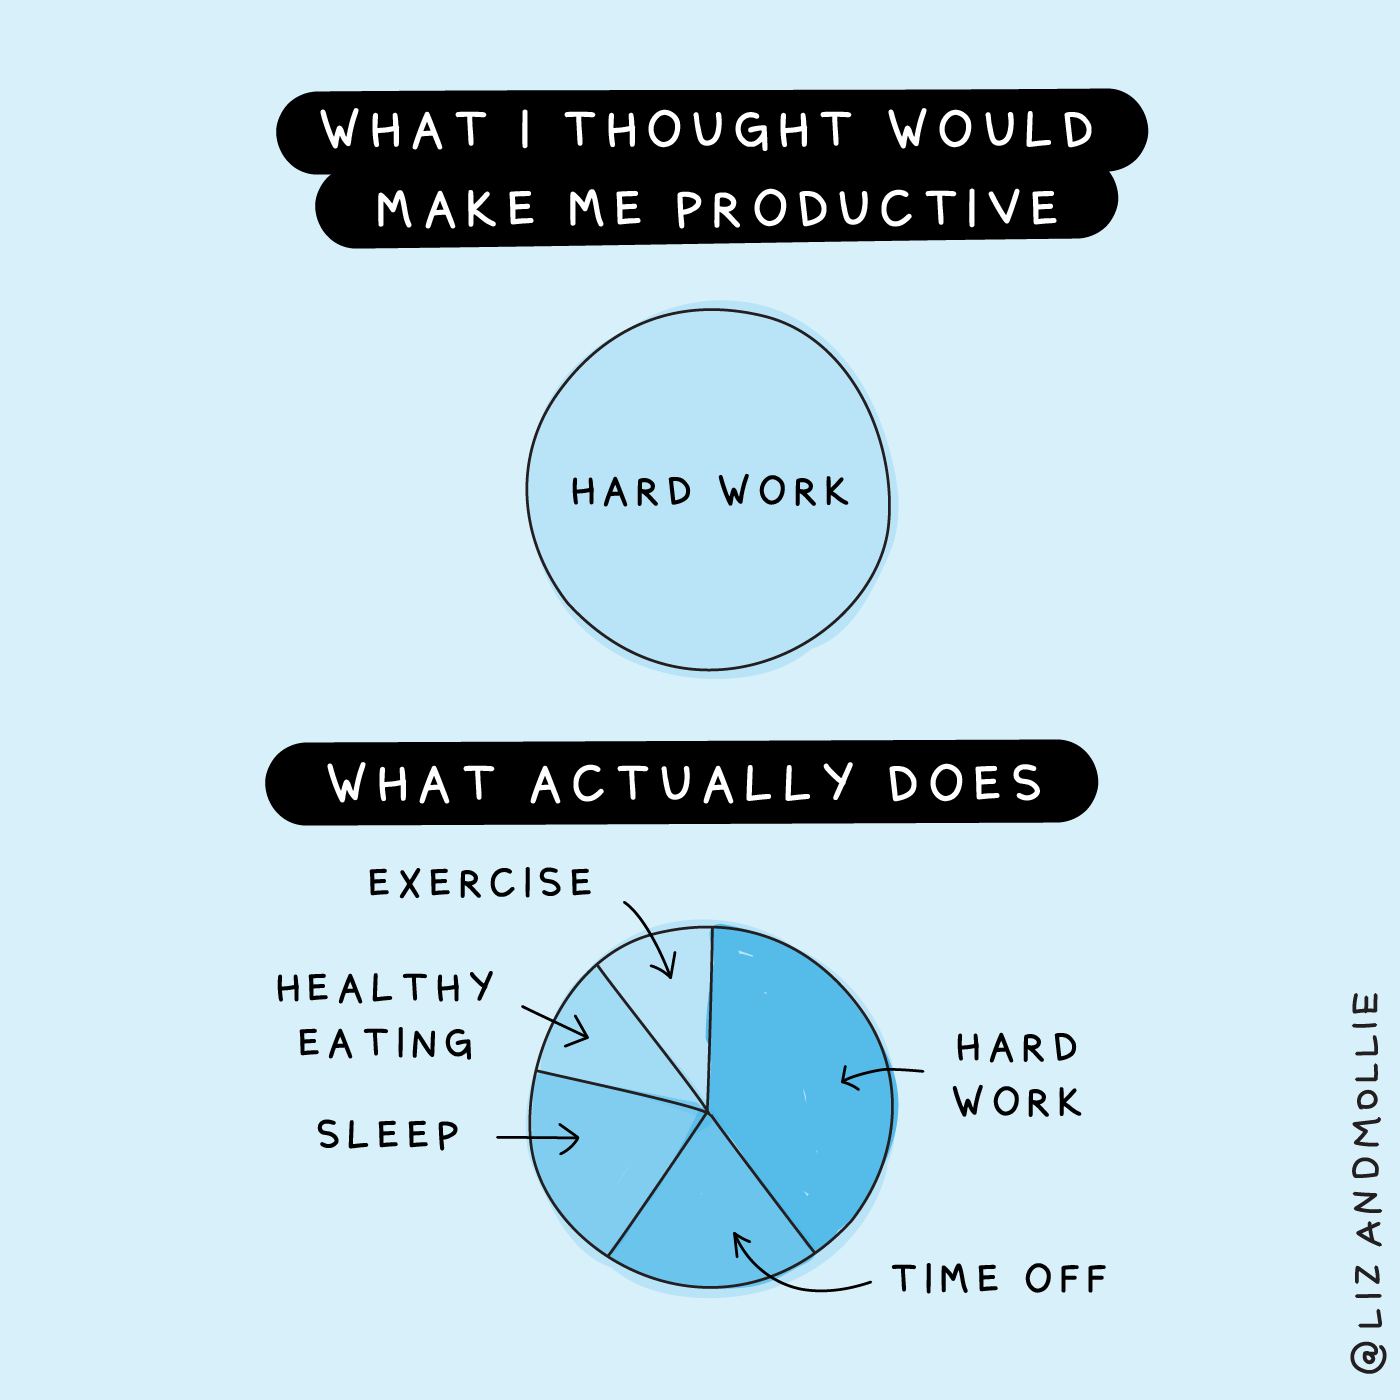 What Makes Me Productive